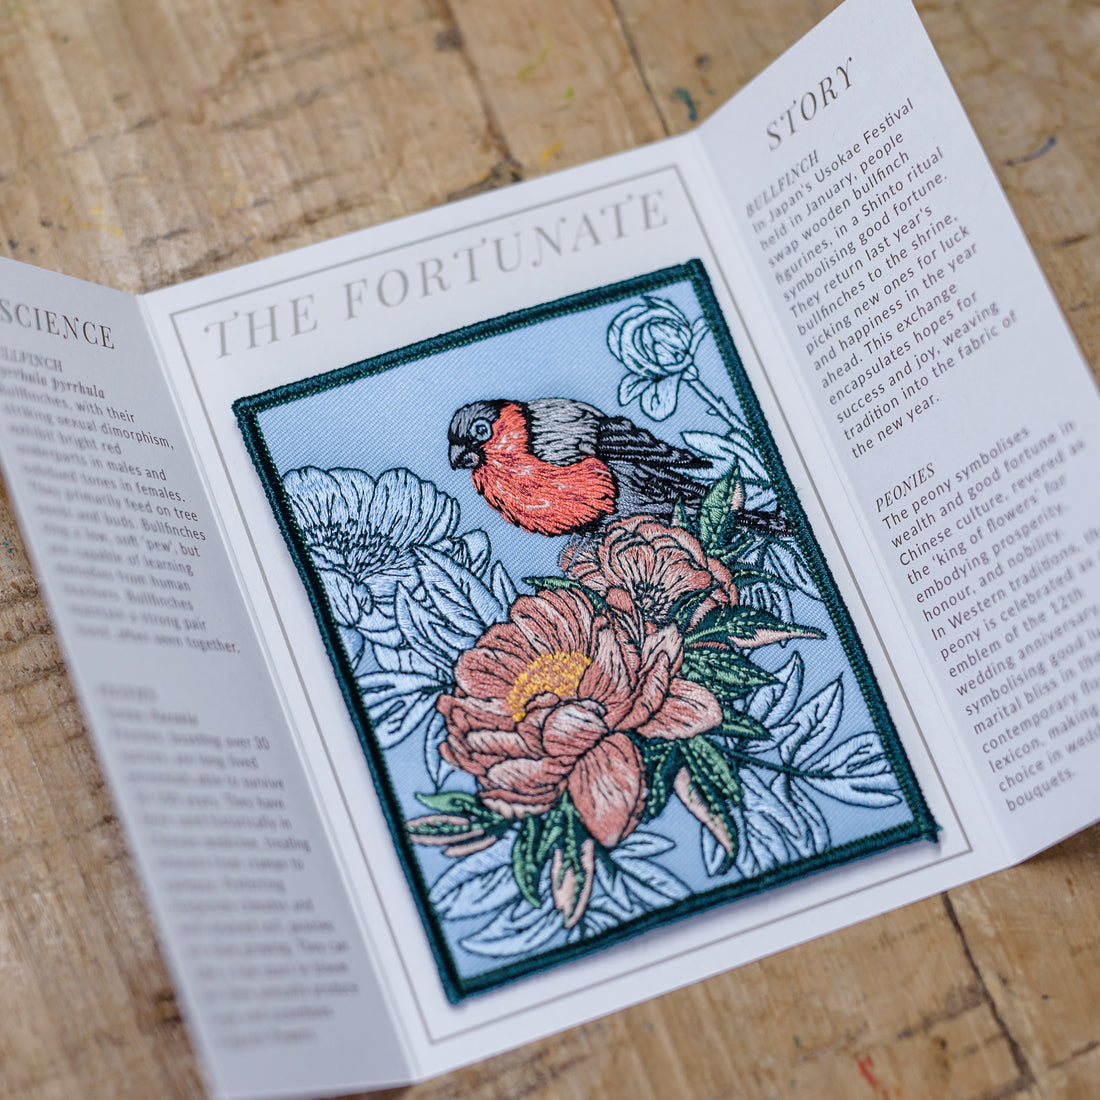 Bullfinch and Peony Flowers Embroidered Patch in gatefold card with science and story behind the species